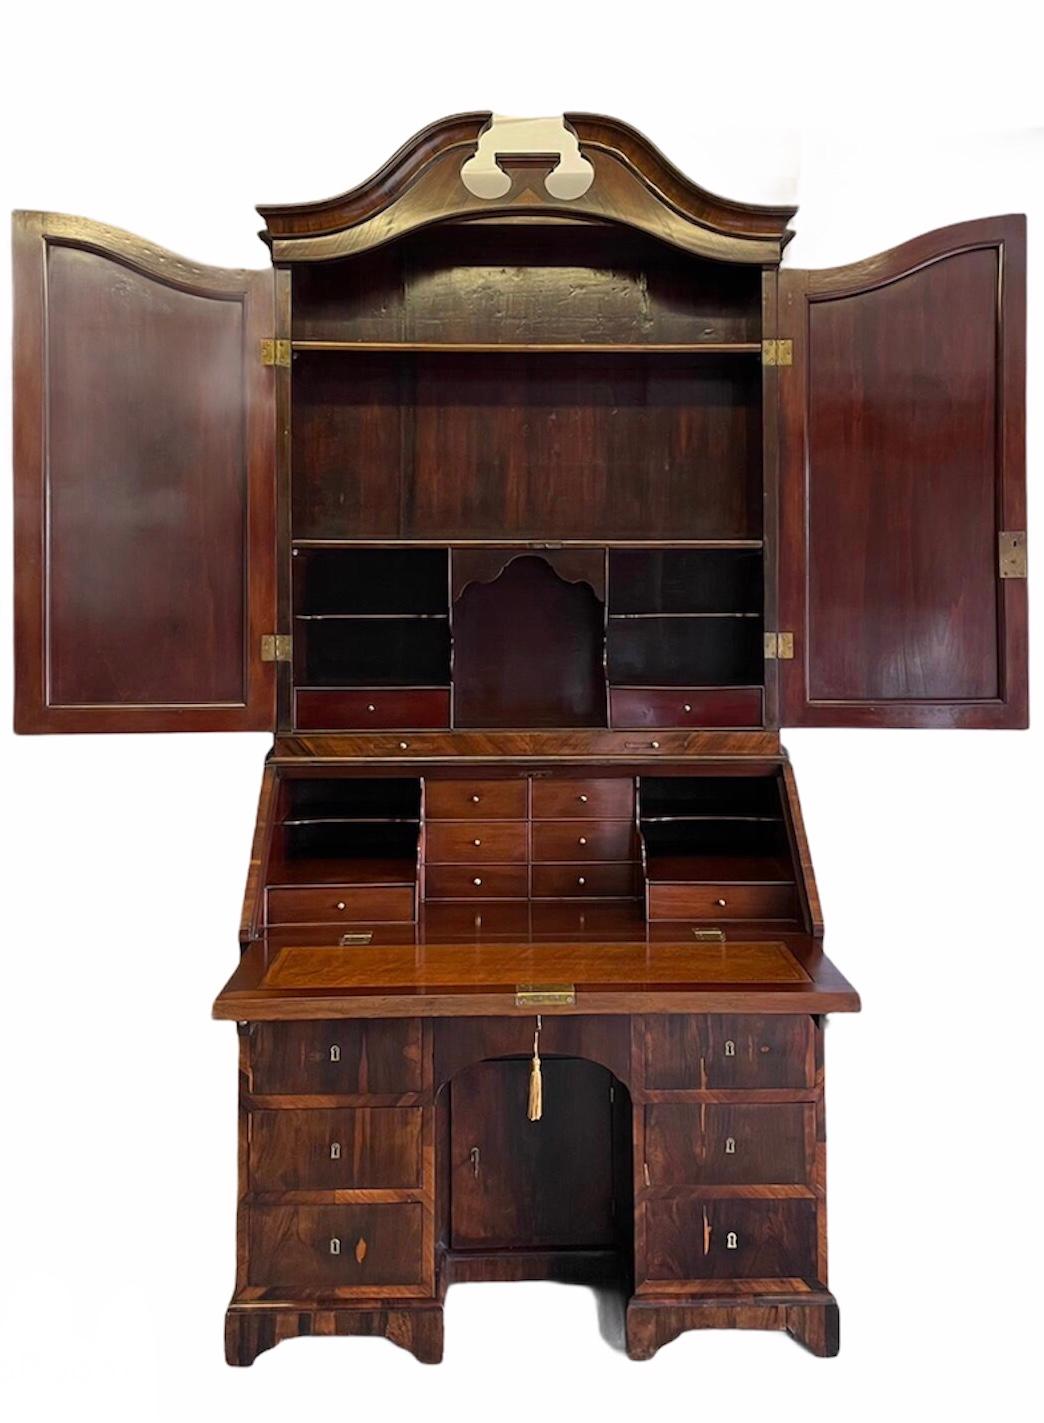 Fine antique 18th century rosewood bureau bookcase having a magnificent top section with a shaped moulded swan neck pediment, two shaped doors both with original mirrors which open to reveal the most superior quality fitted interior of drawers,